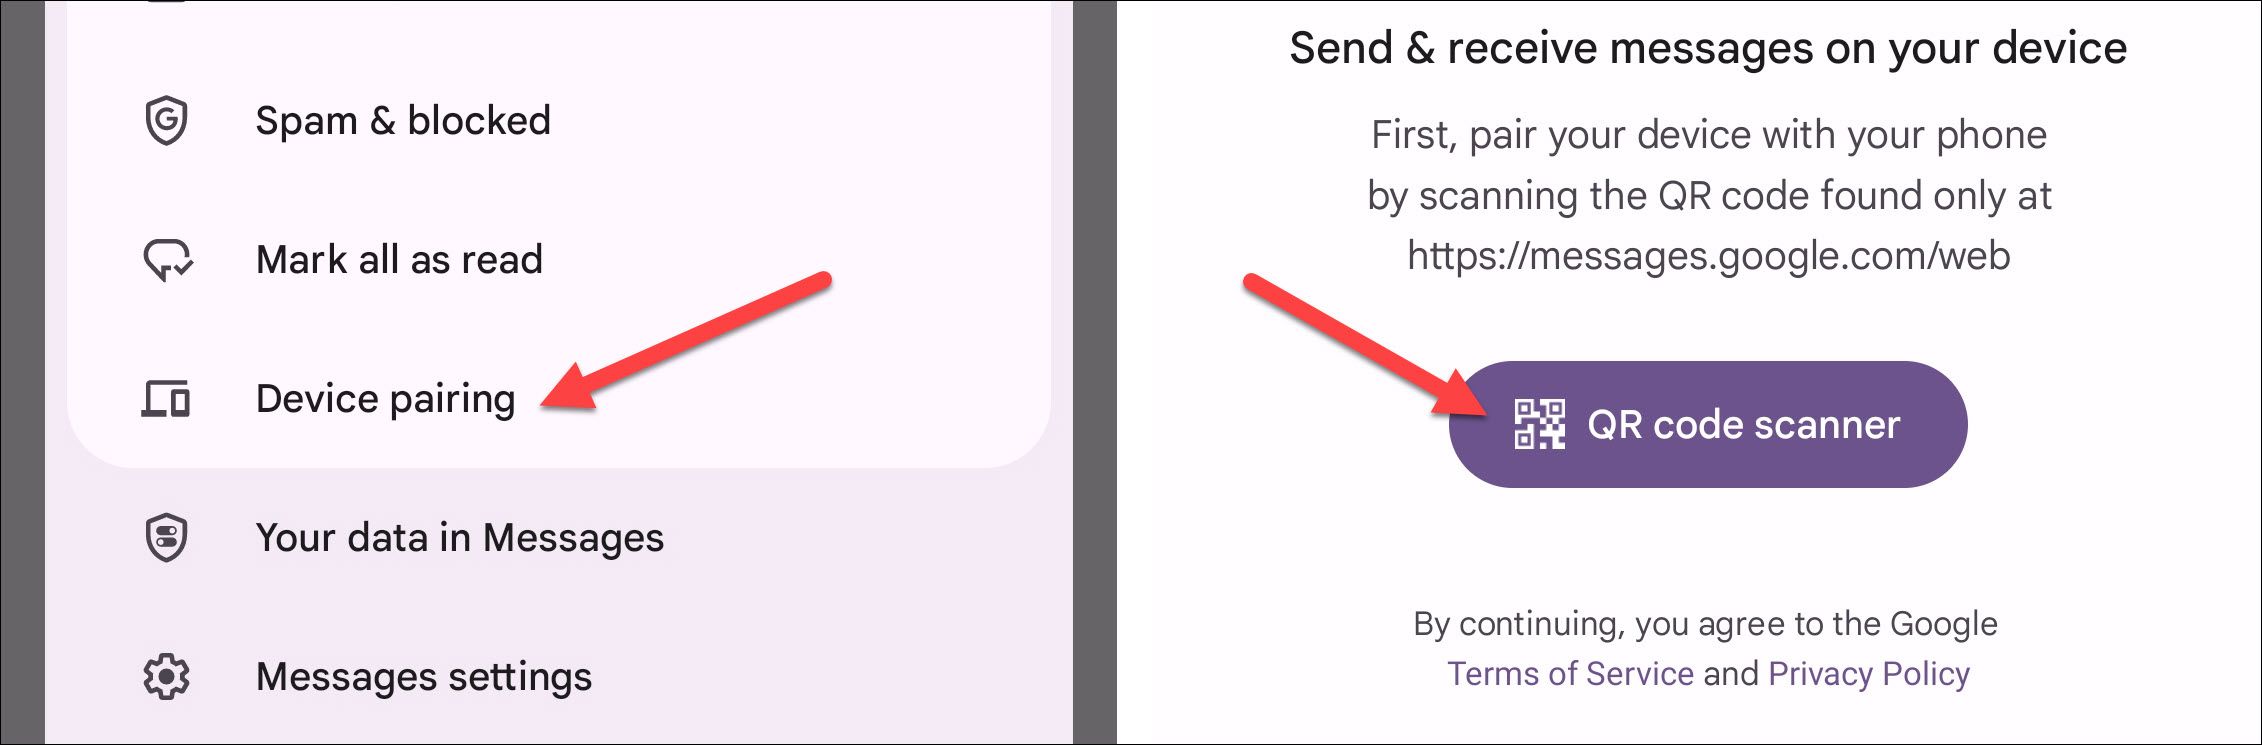 Screenshots showing how to set up Google Messages for web.